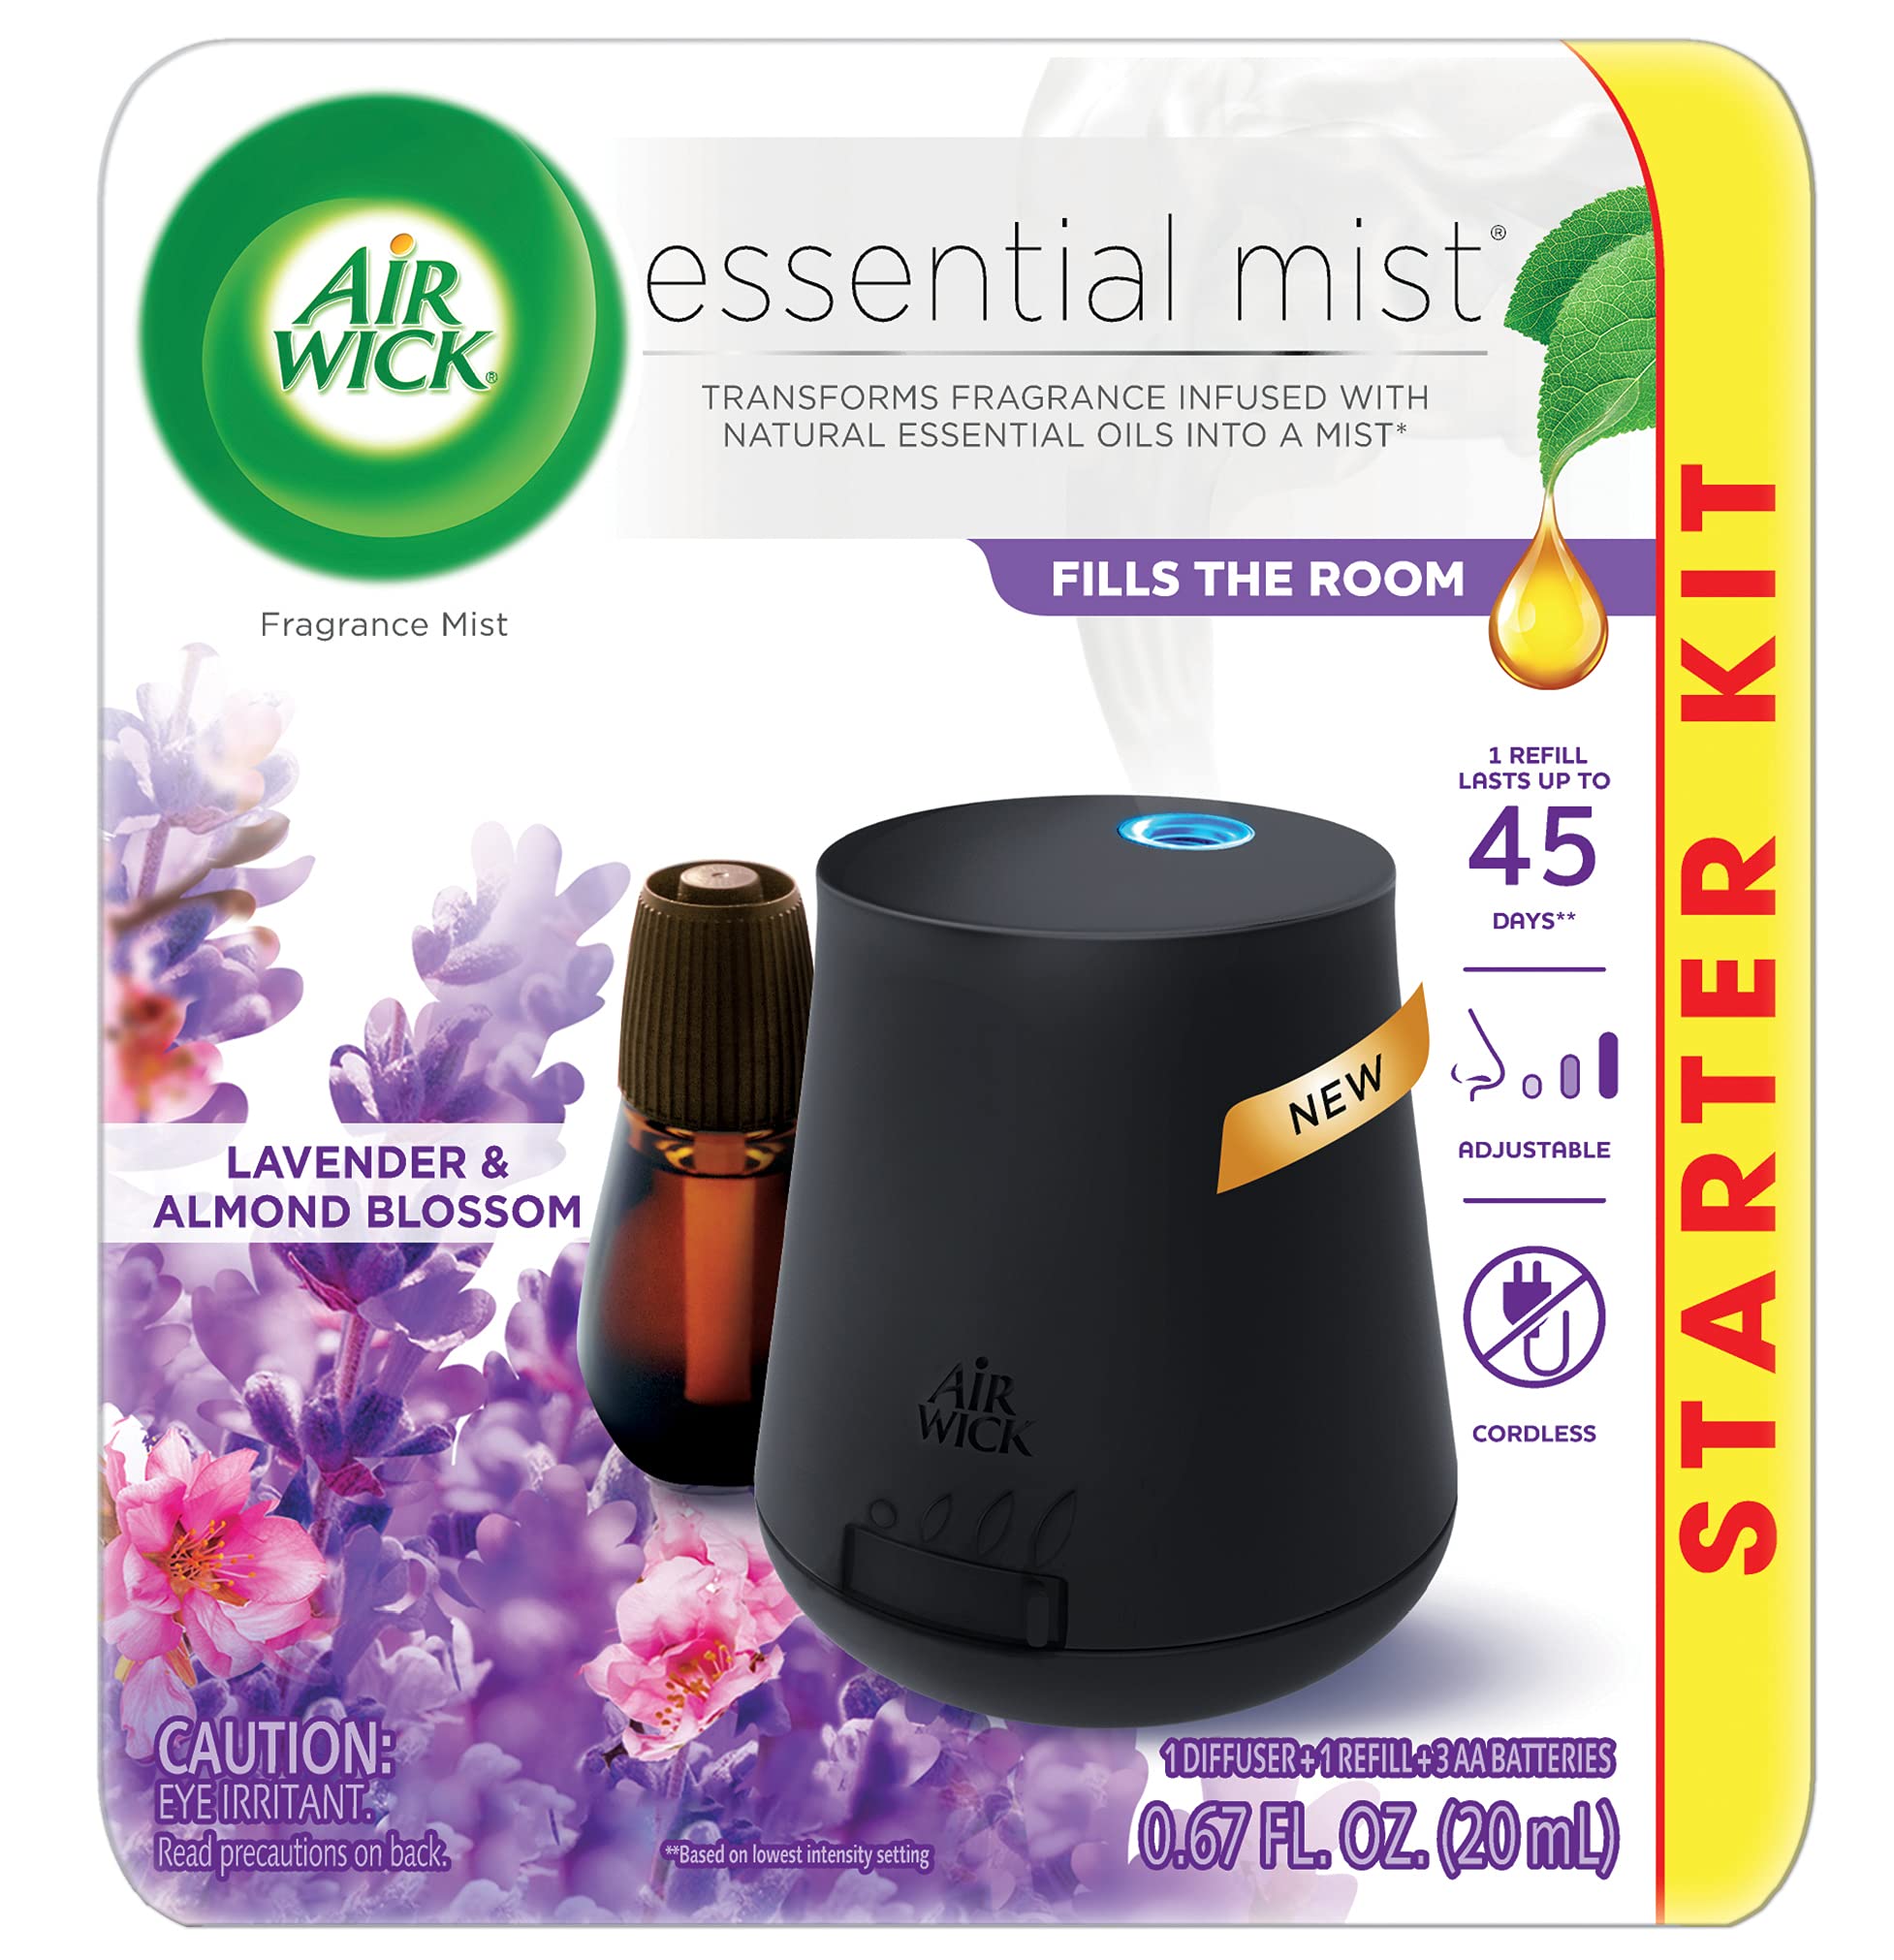 Air Wick Essential Mist Aromatherapy Sleep Refill Oils Diffuser, 1 Ea